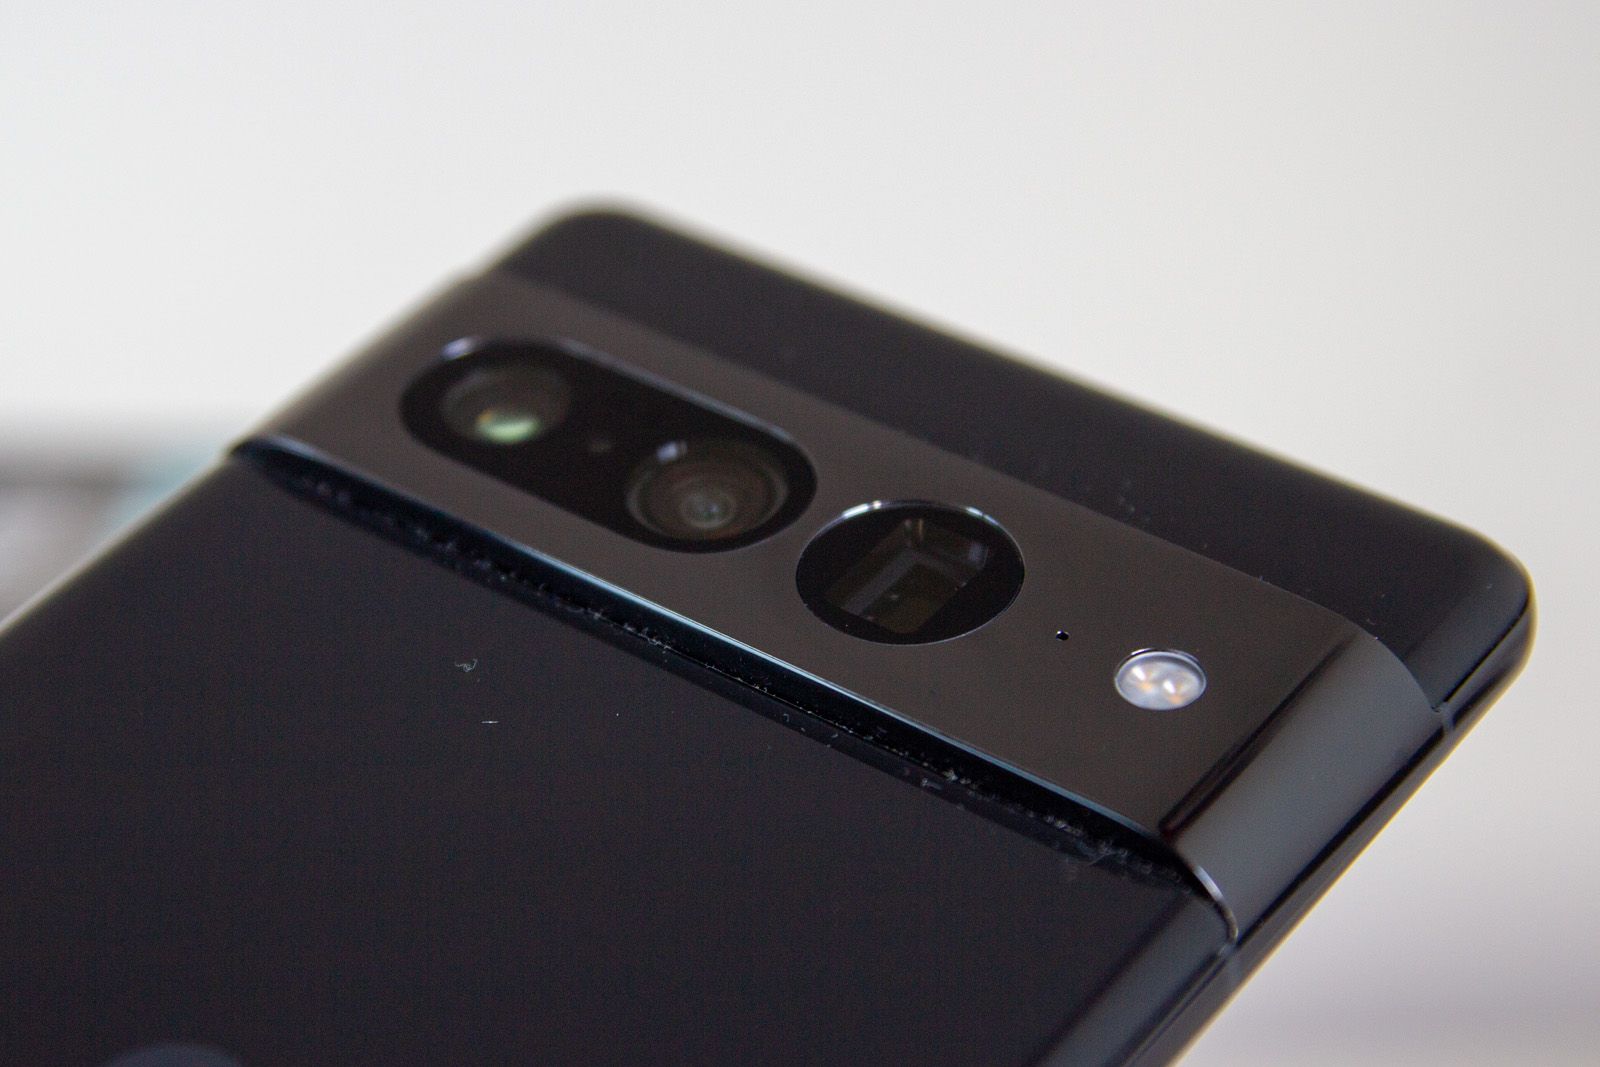 Pixel 7 Pro rear view showing cameras